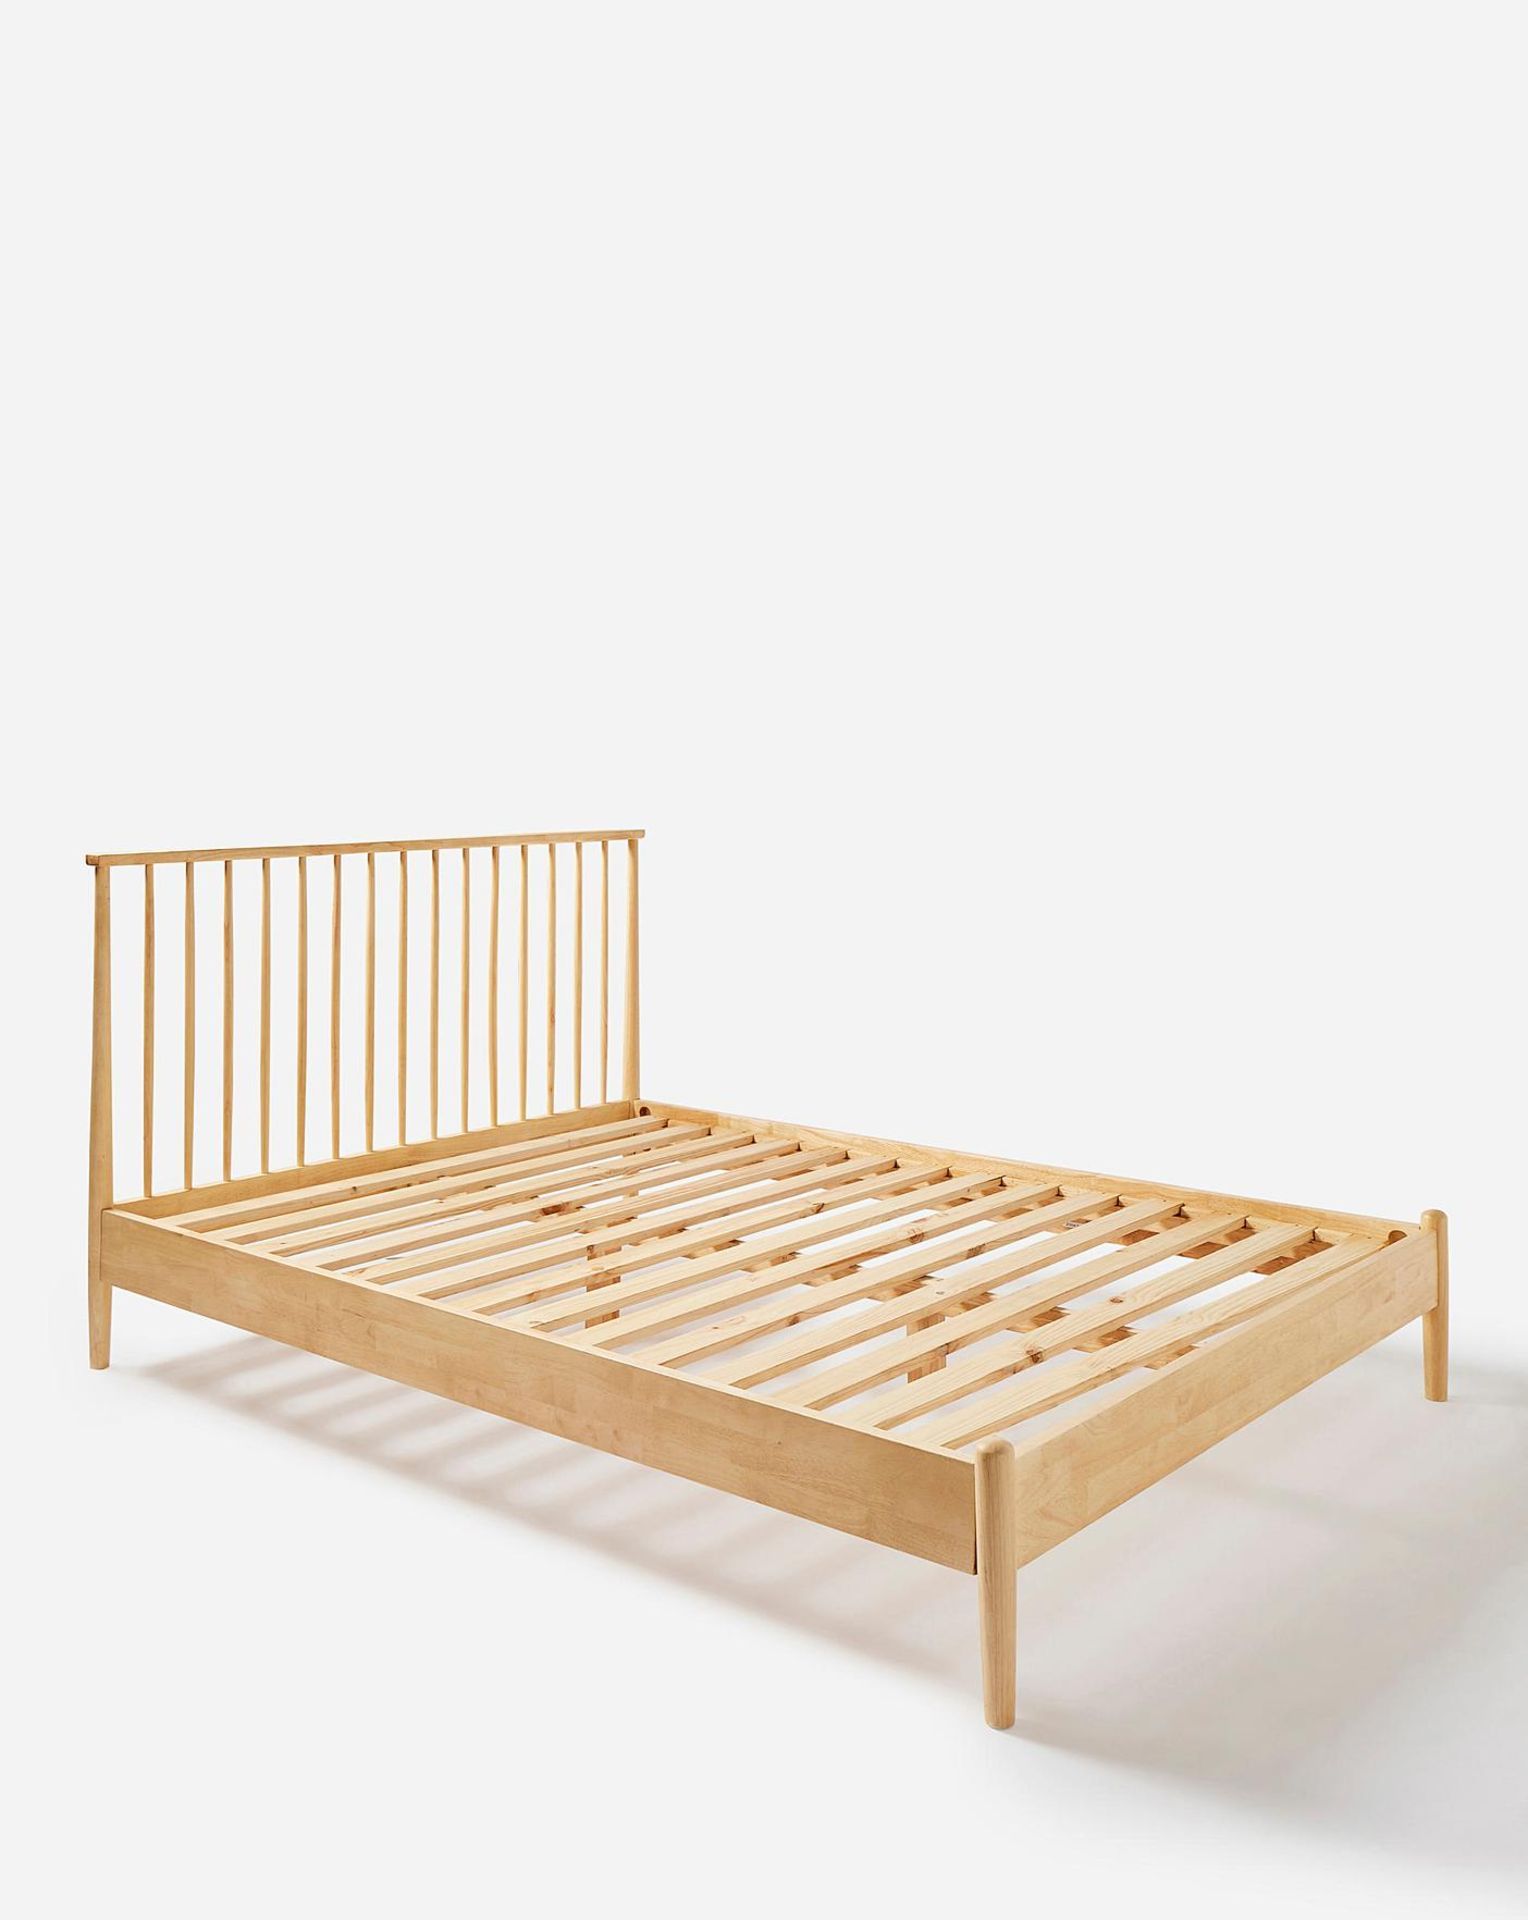 NEW & BOXED JULIPA Erika Wooden Spindle KINGSIZE Bed Frame. LIGHT WOOD. RRP £749. EACH. Part of - Image 3 of 3